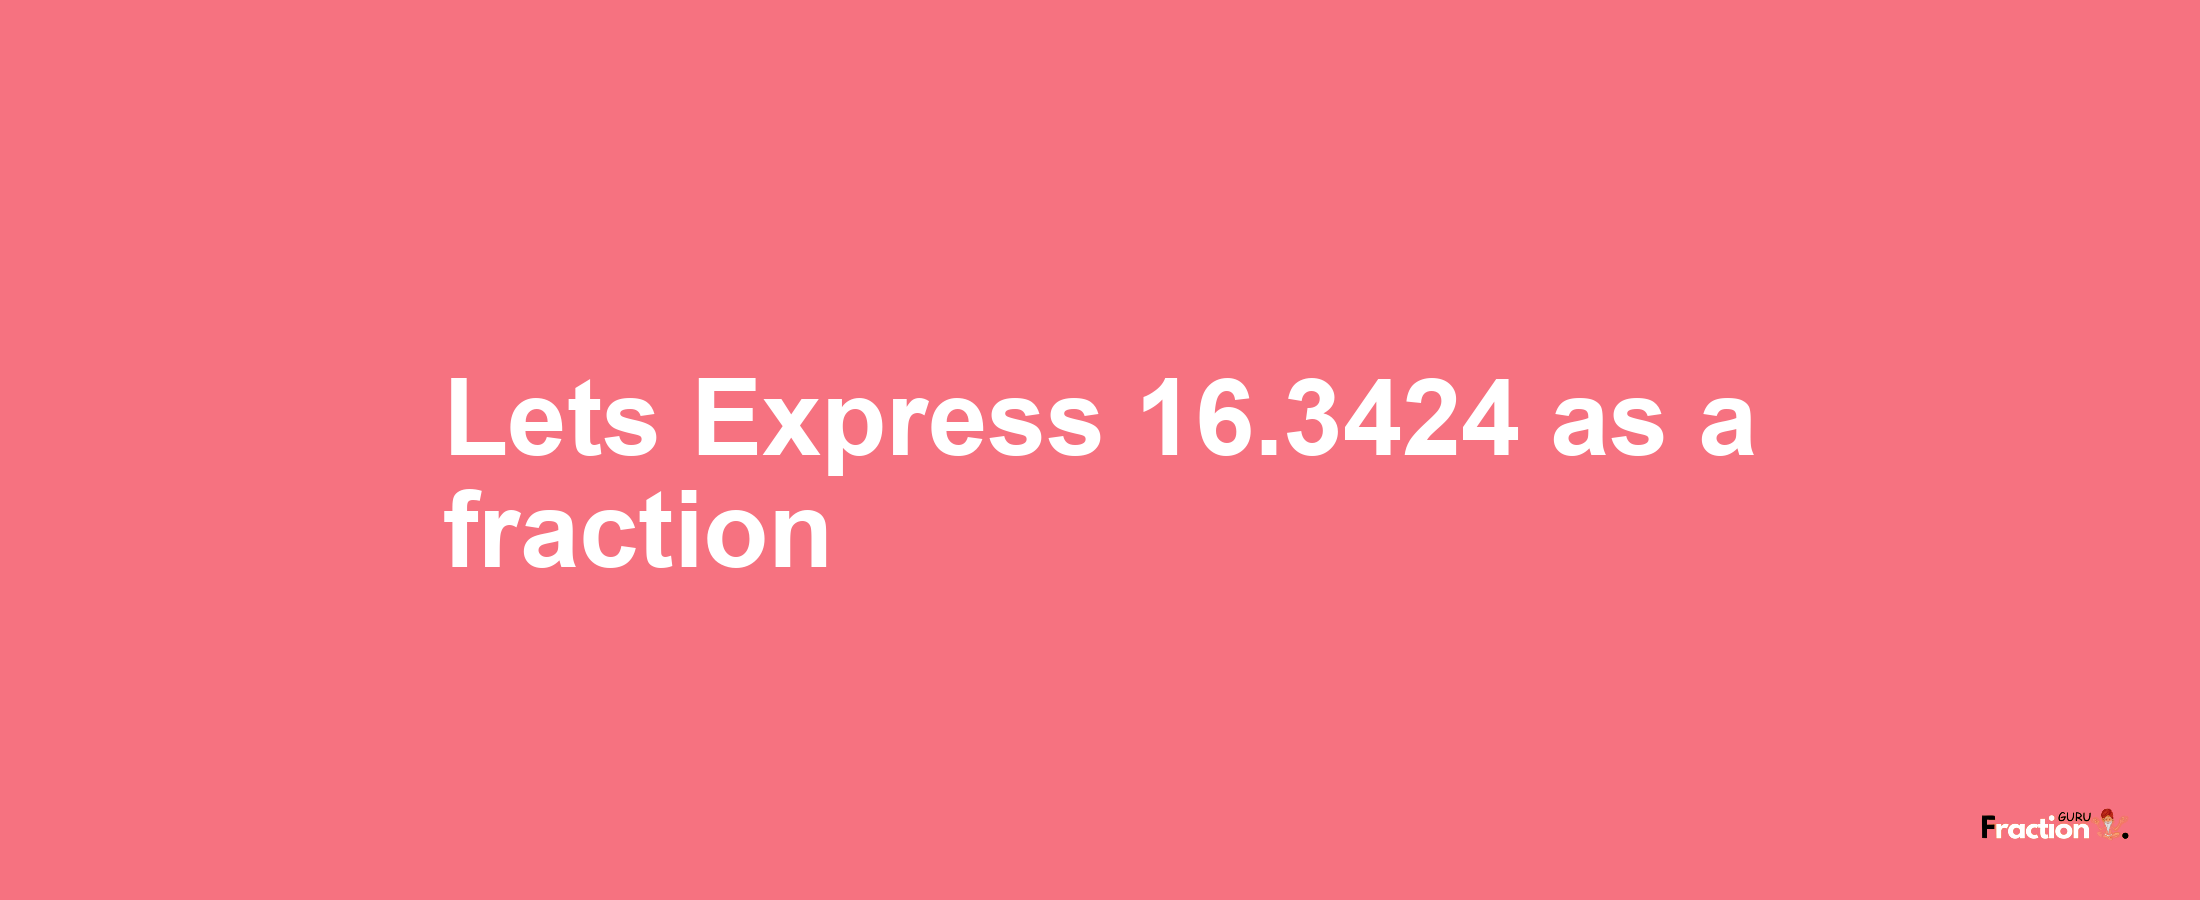 Lets Express 16.3424 as afraction